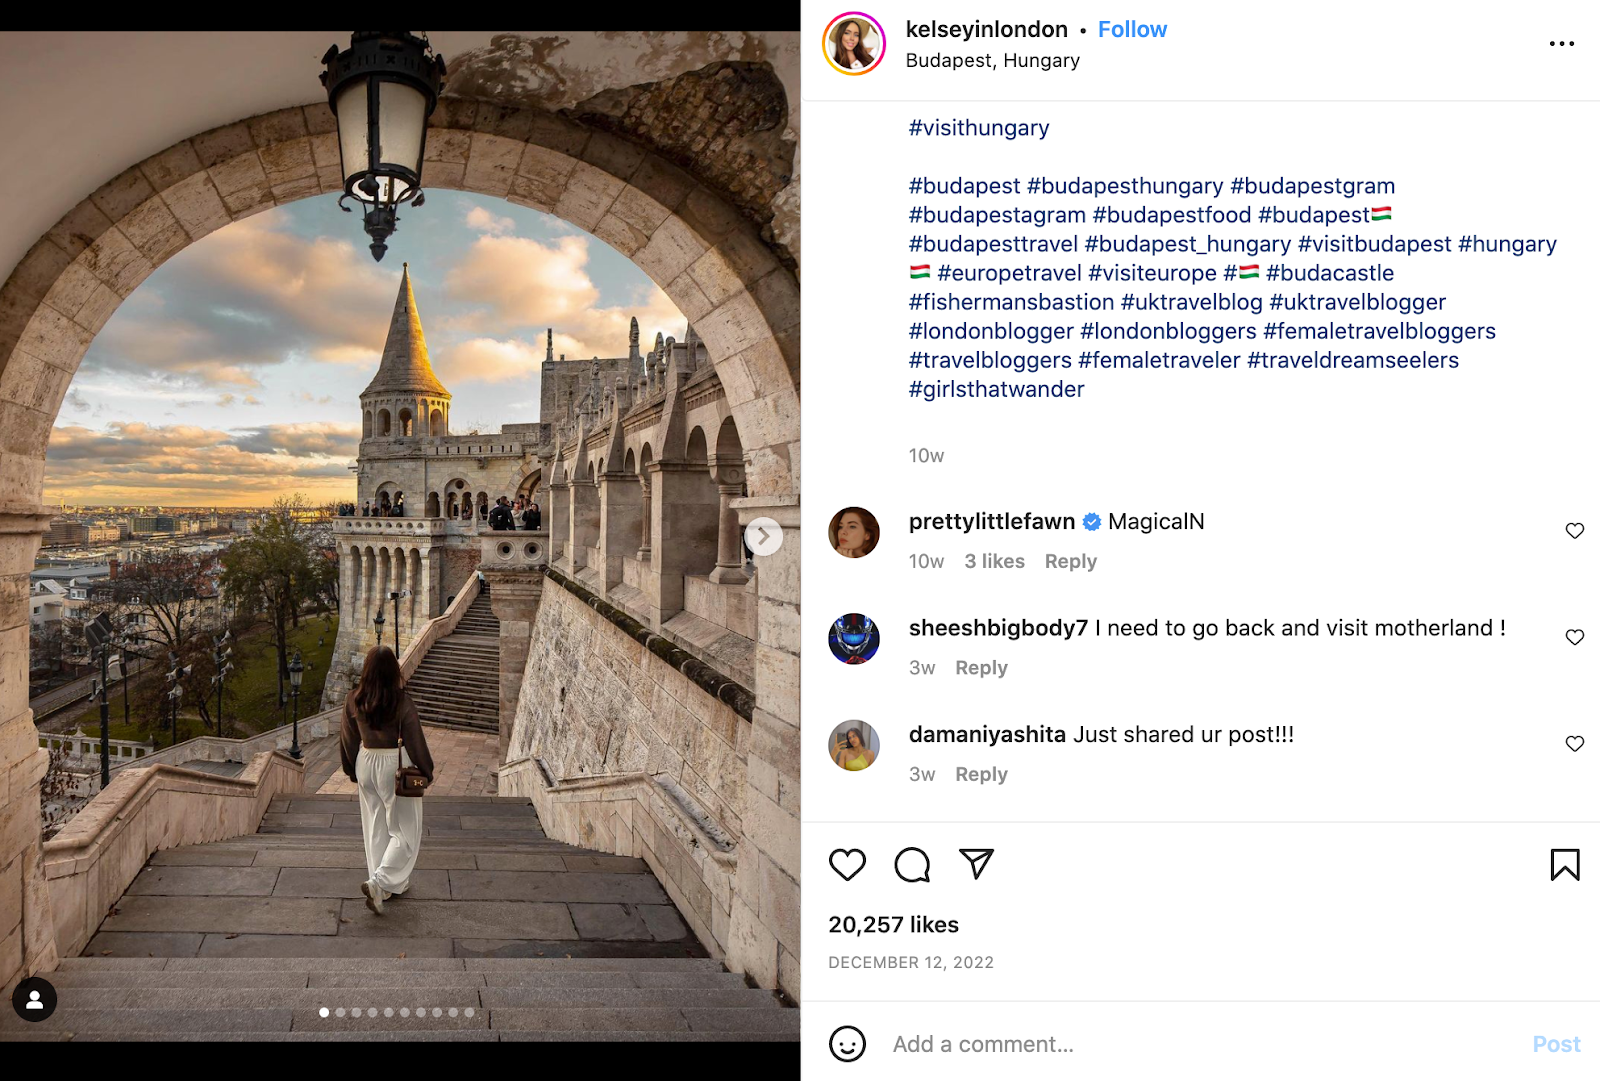 A screenshot of the kelseyinlondon post on Instagram featuring hashtags and a photo of a girl in Budapest